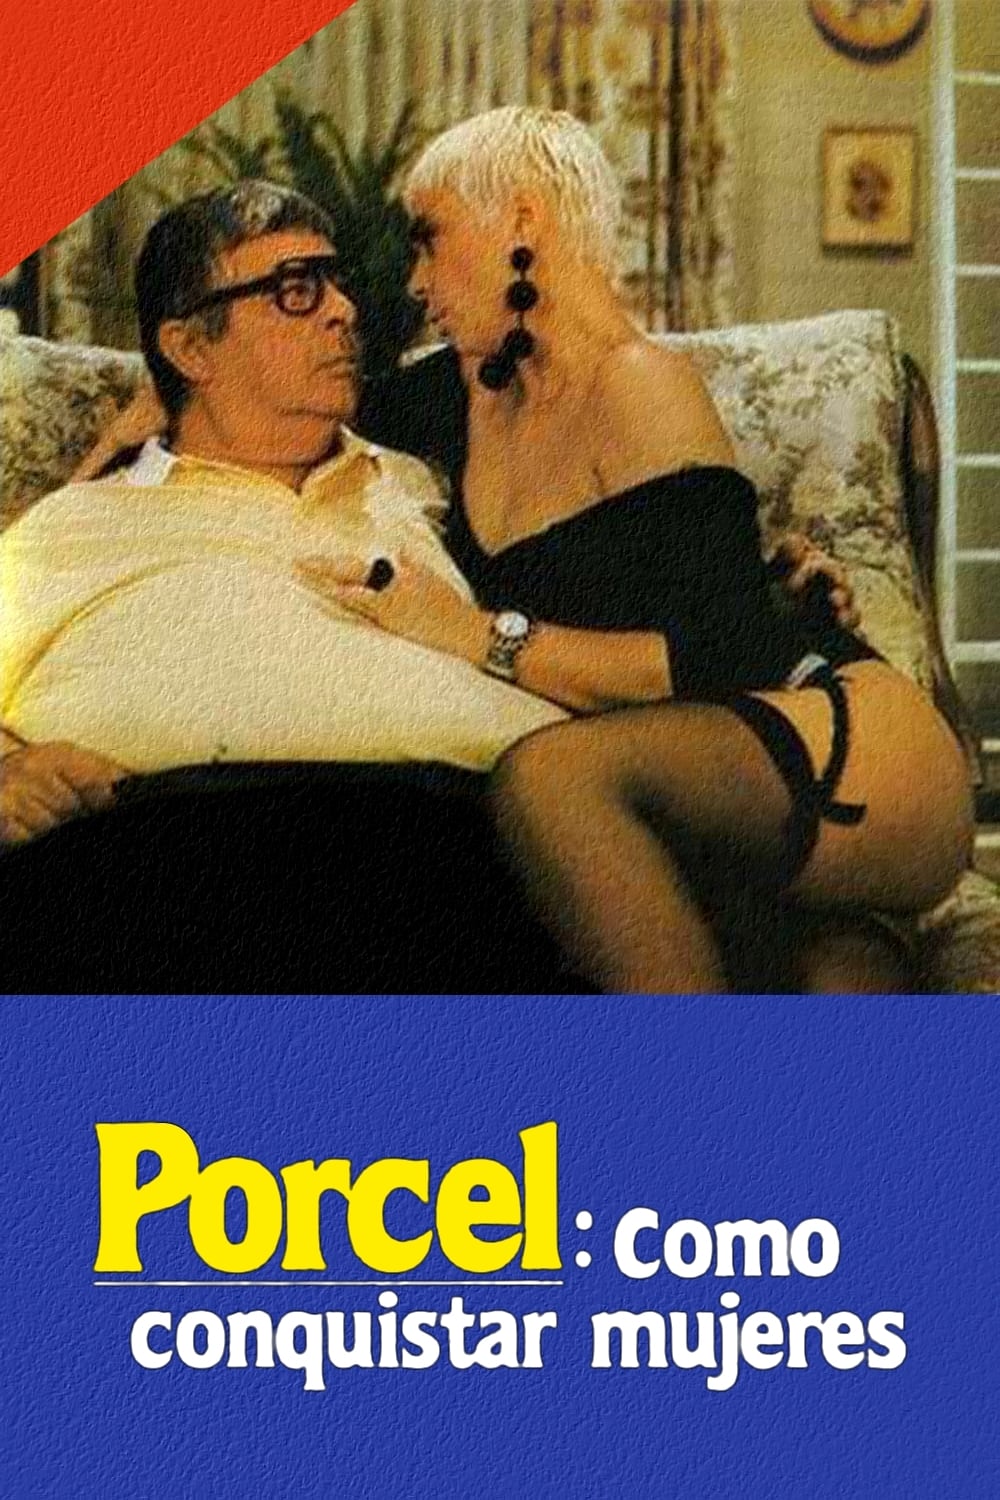 Porcel: How to conquer women